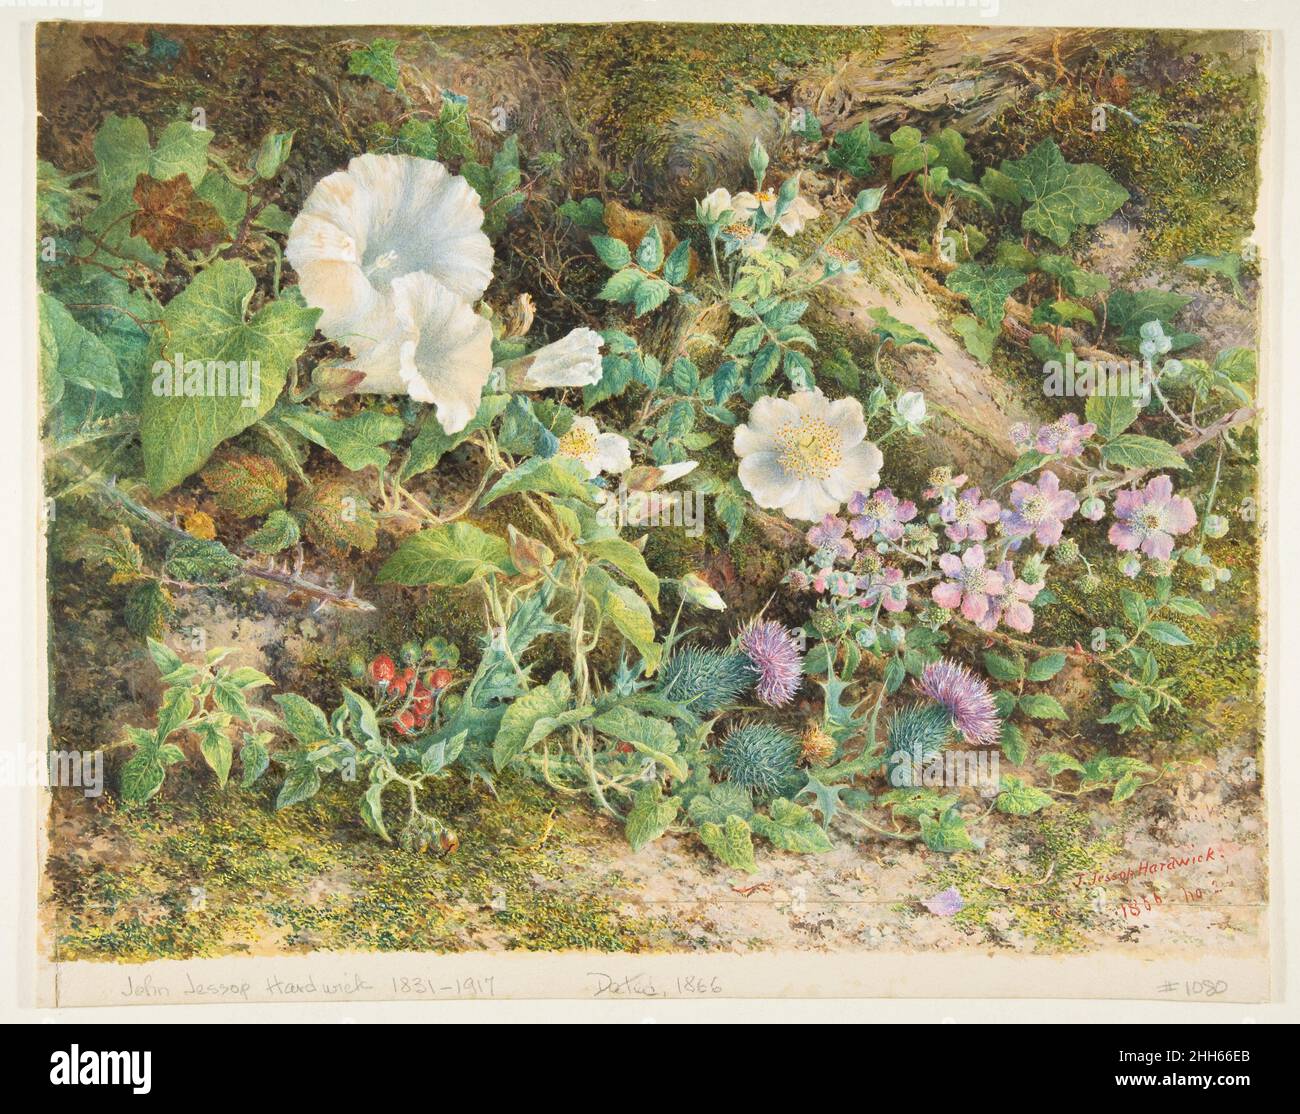 Flower Study 1866 John Jessop Hardwick British Petunias, wild roses, thistles and red berries are here displayed as though growing amongst moss and fallen logs. Close focus and careful delineation demonstrate the influence of William Henry Hunt (British, 1790–1864), who had been elected to the Old Watercolour Society in 1826 and specialized in rustic subjects and still-lives, developing a technique that involved building up dense layers of color over a ground of white gouache to create luminosity. Hartwick uses that manner here to fine effect. As a student, he won a watercolor prize at Somerse Stock Photo